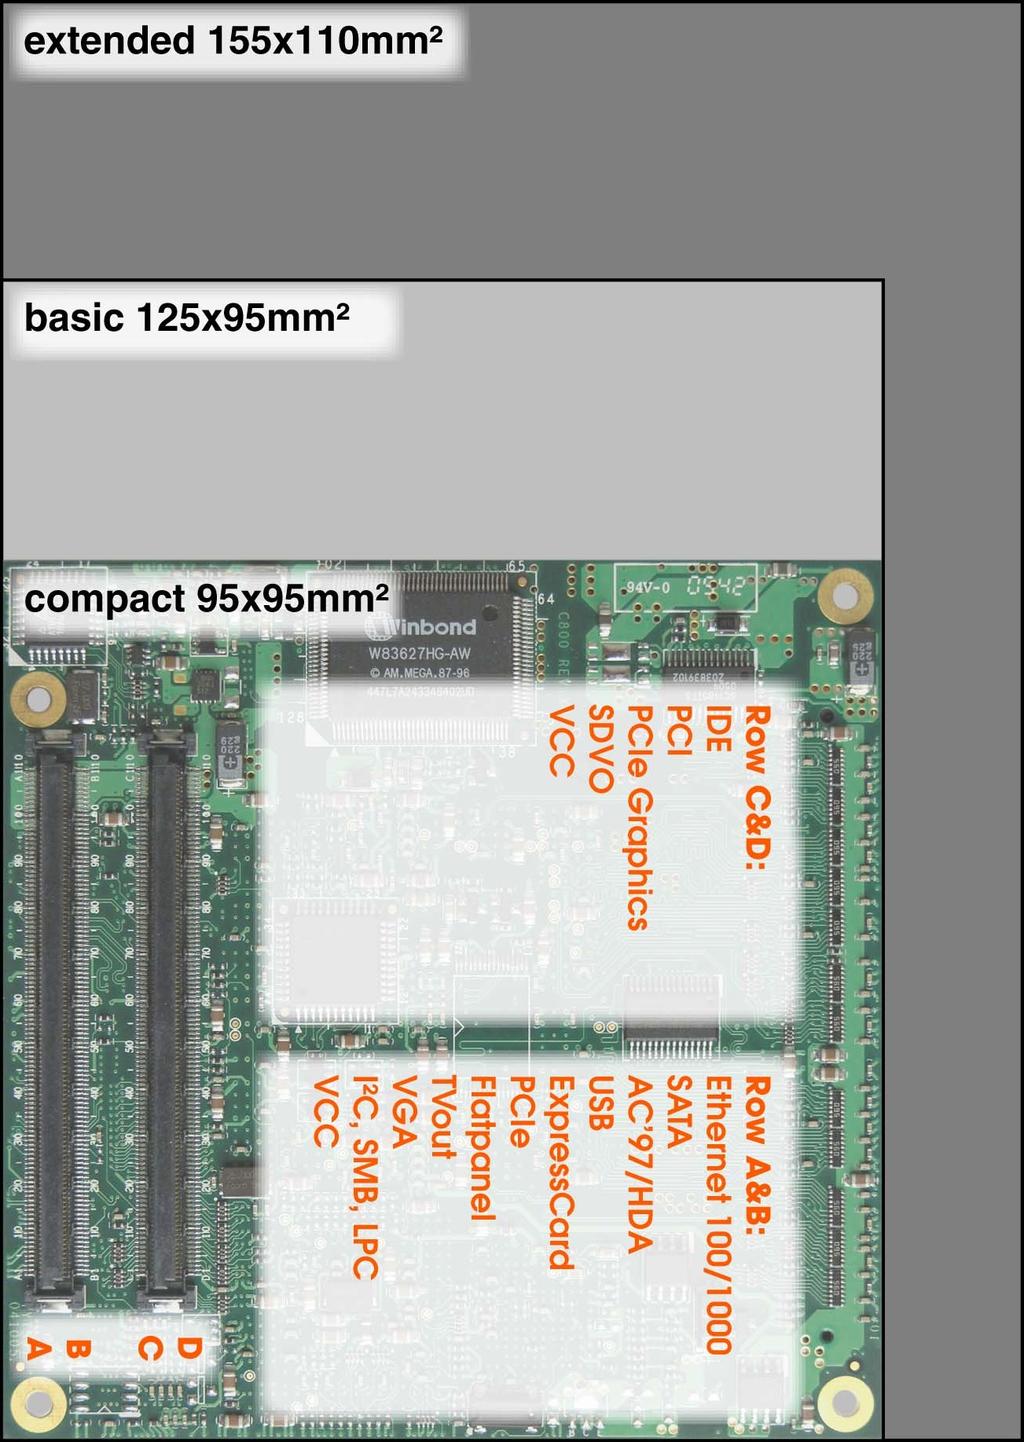 COM Express Dimensions Compact (95mm x 95mm) Perfect for limited space apps. Suitable for ultra low voltage CPUs Ideal for SOC variants Not yet specified by PICMG!